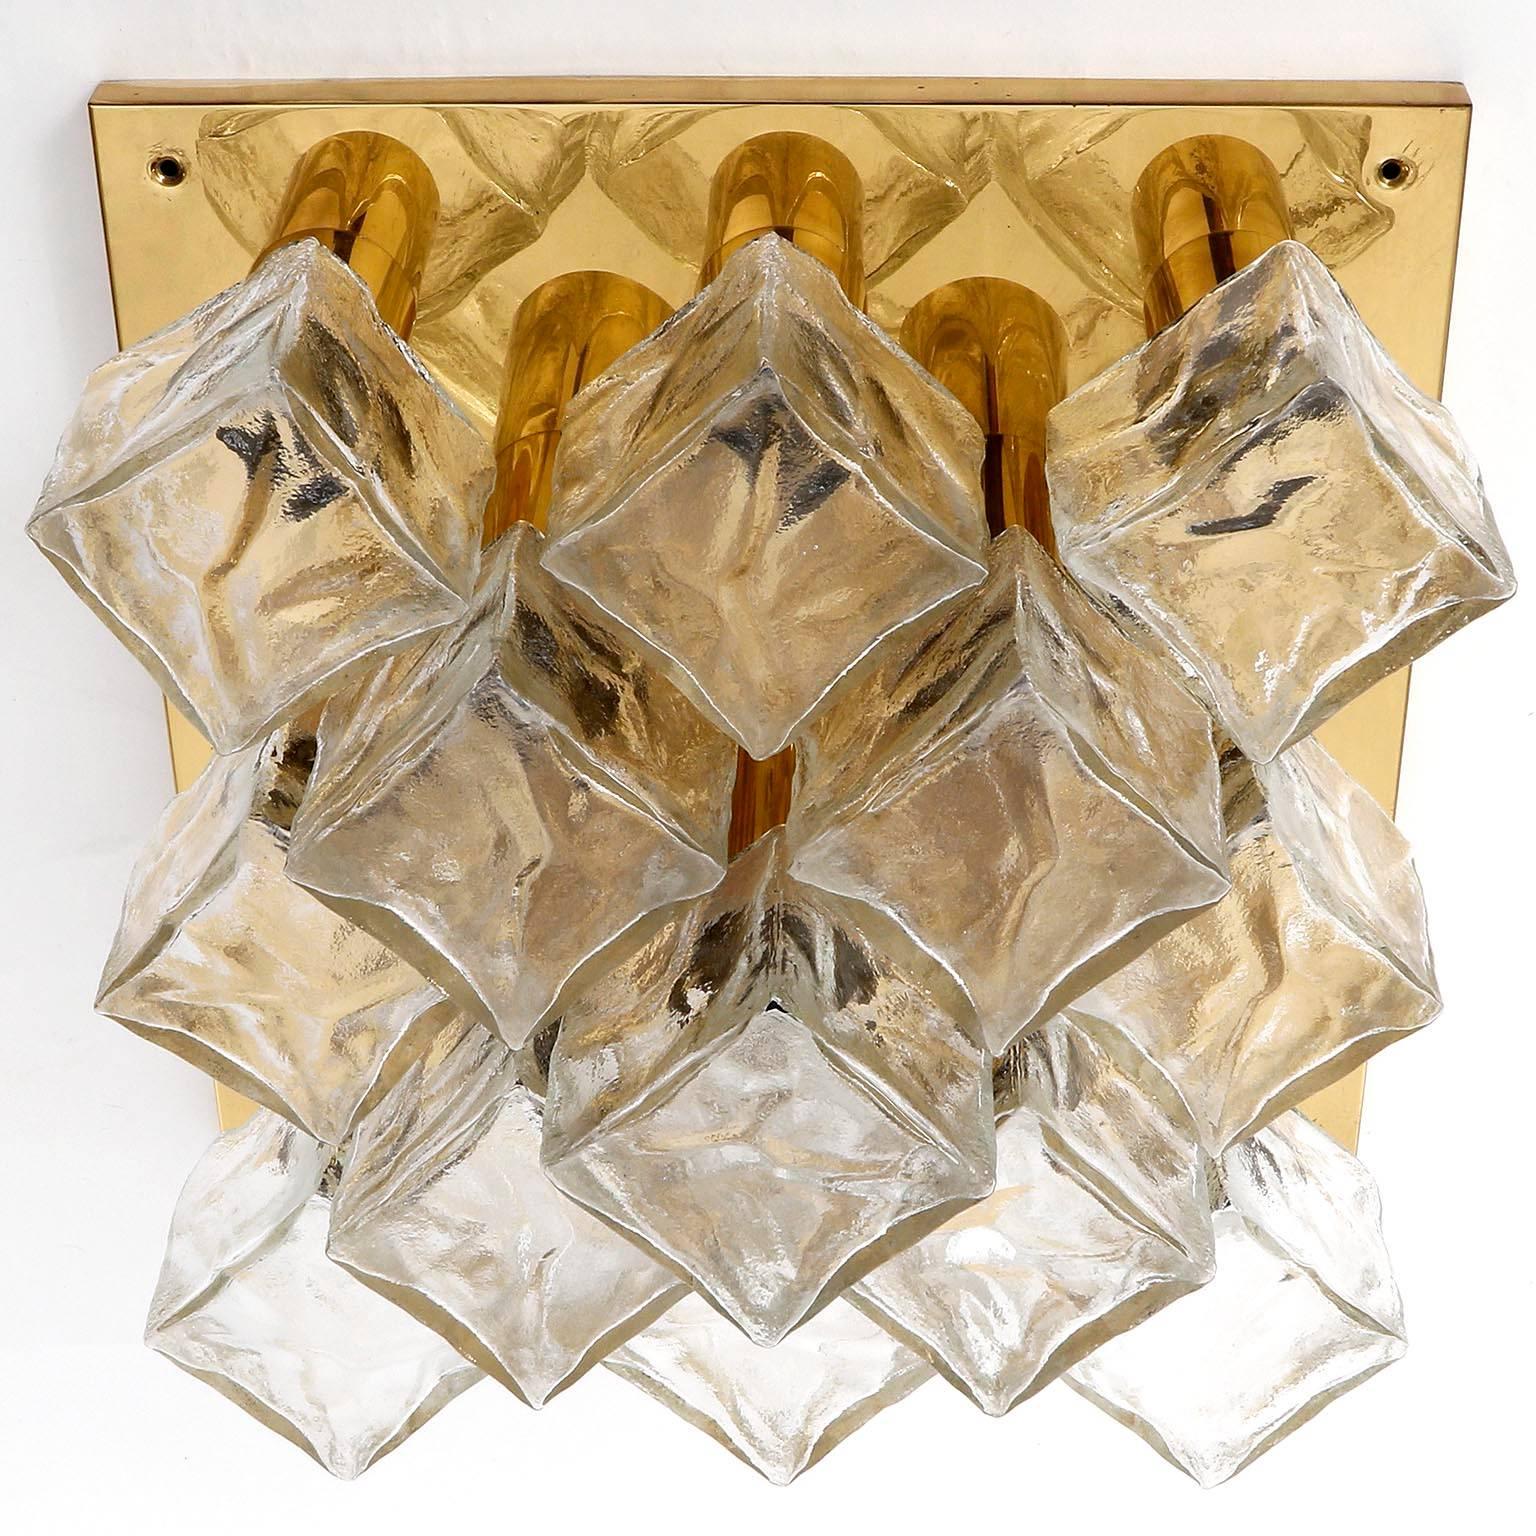 One of three fixtures model 'Cubus' (German 'Würfel') by Kalmar, Austria, manufactured in midcentury, circa 1970 (end of 1960s and beginning of 1970s).
They are made of polished brass and frosted cubic glasses. There are 13 small screw base bulbs